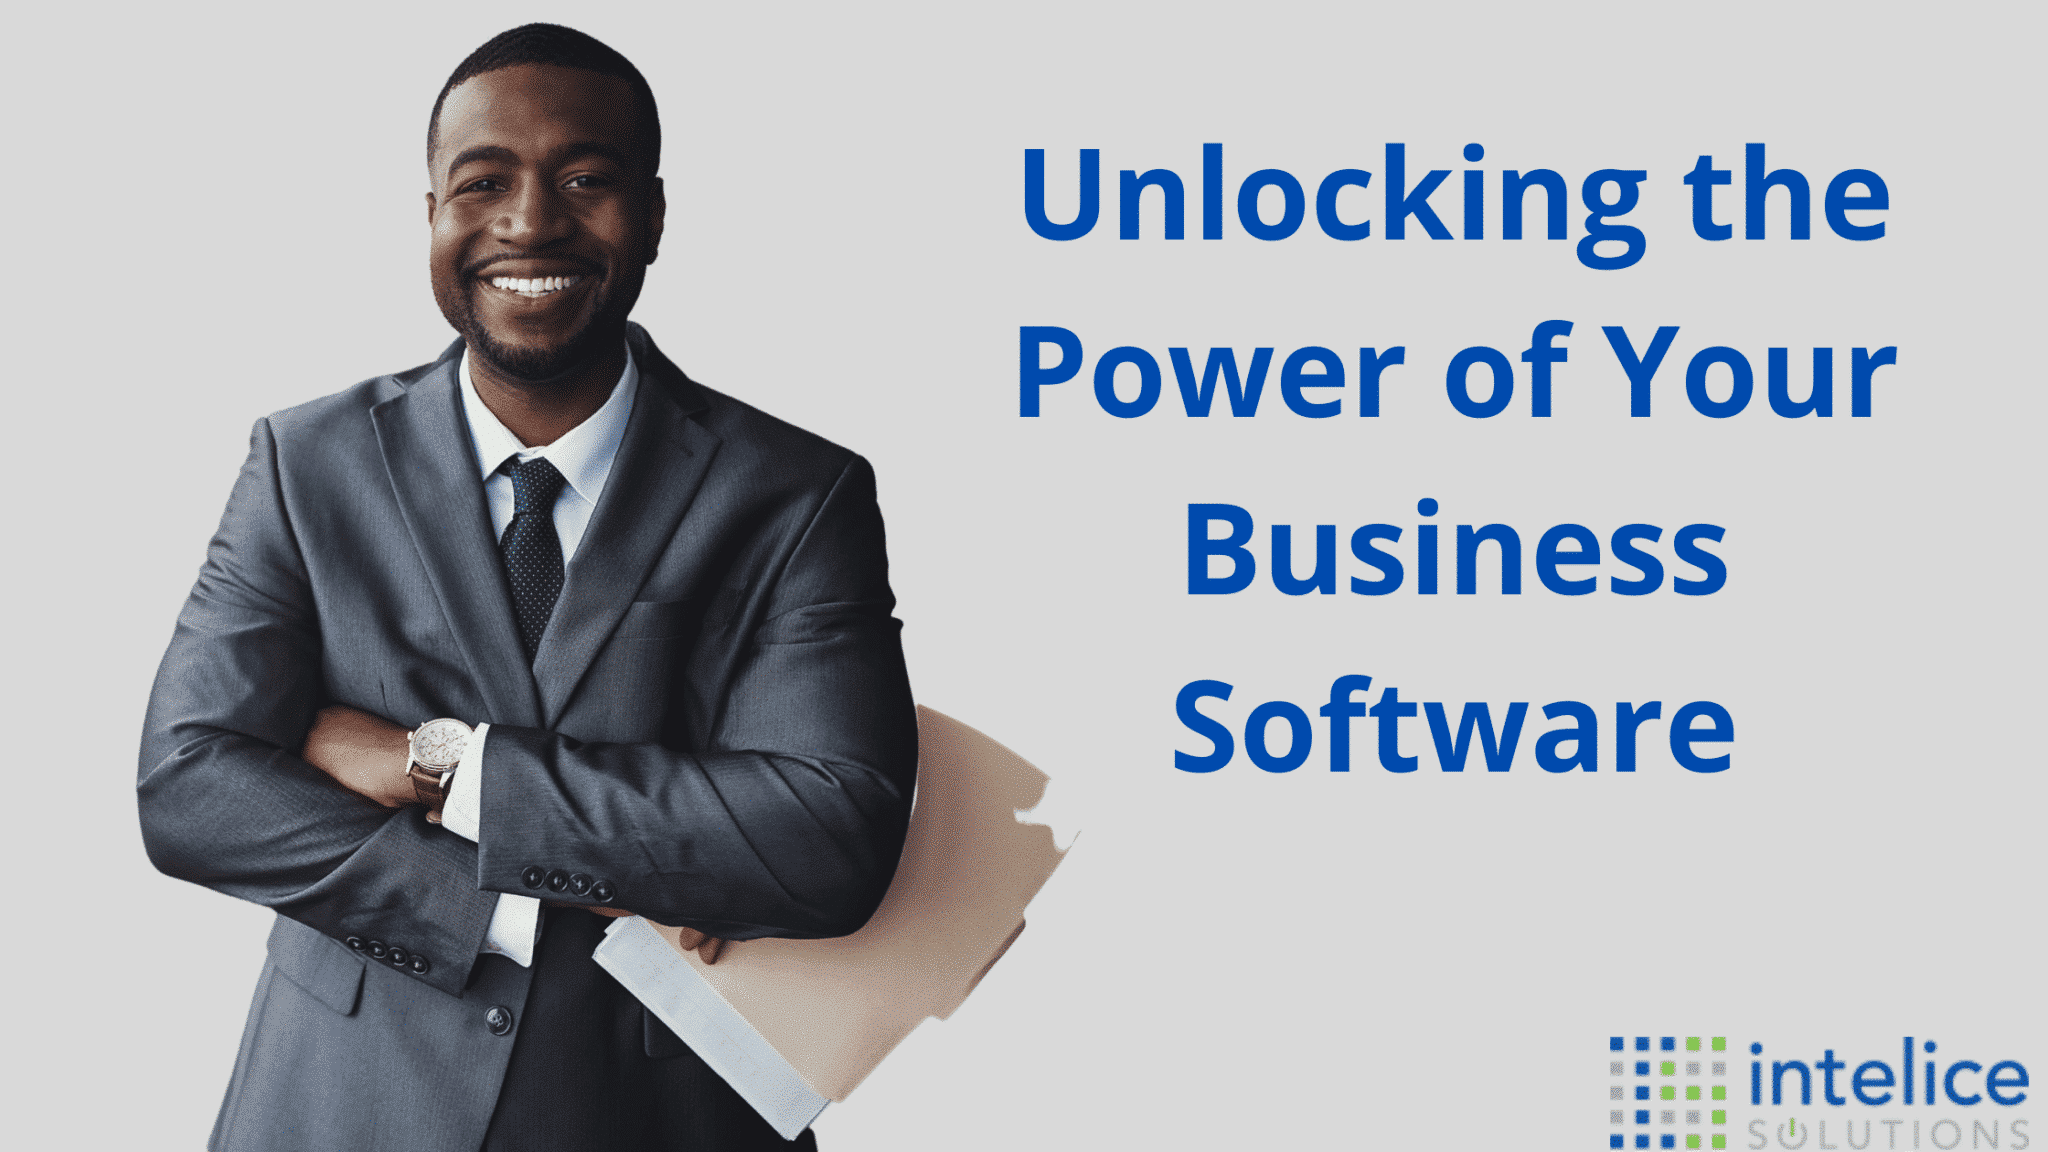 Unlocking the Power of Your Business Software